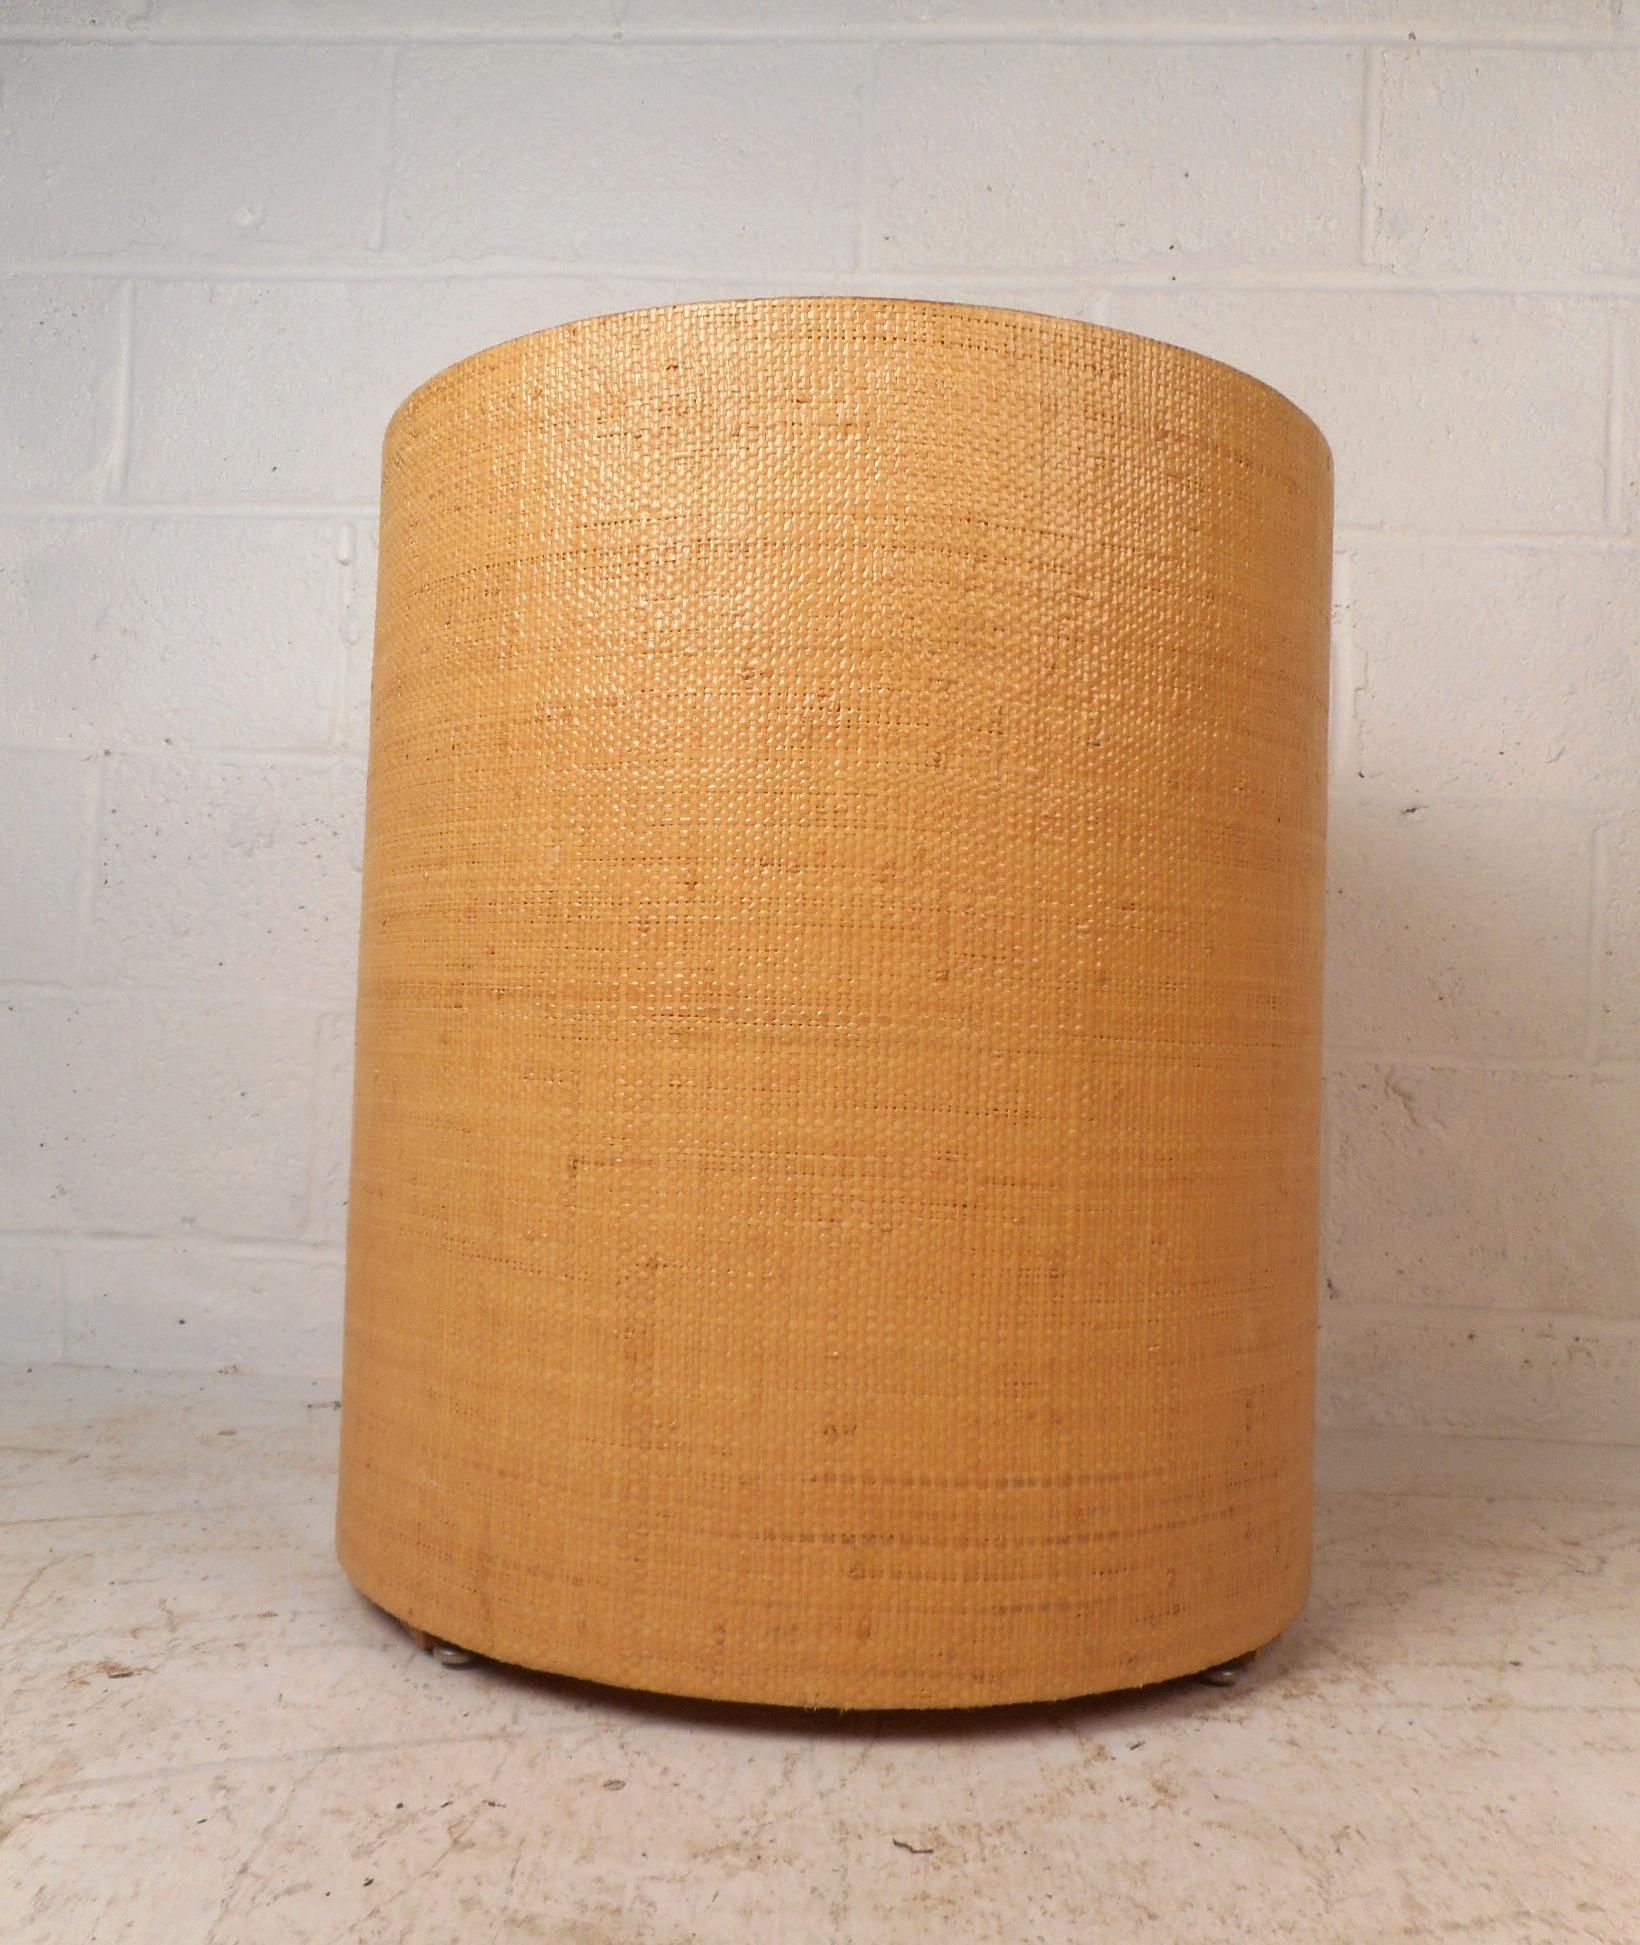 This unique cylindrical side table is enveloped in grasscloth and makes the perfect addition to any setting. The item is versatile and can be used as anything from a side table to a pedestal. It's masterfully crafted and in the style of Karl